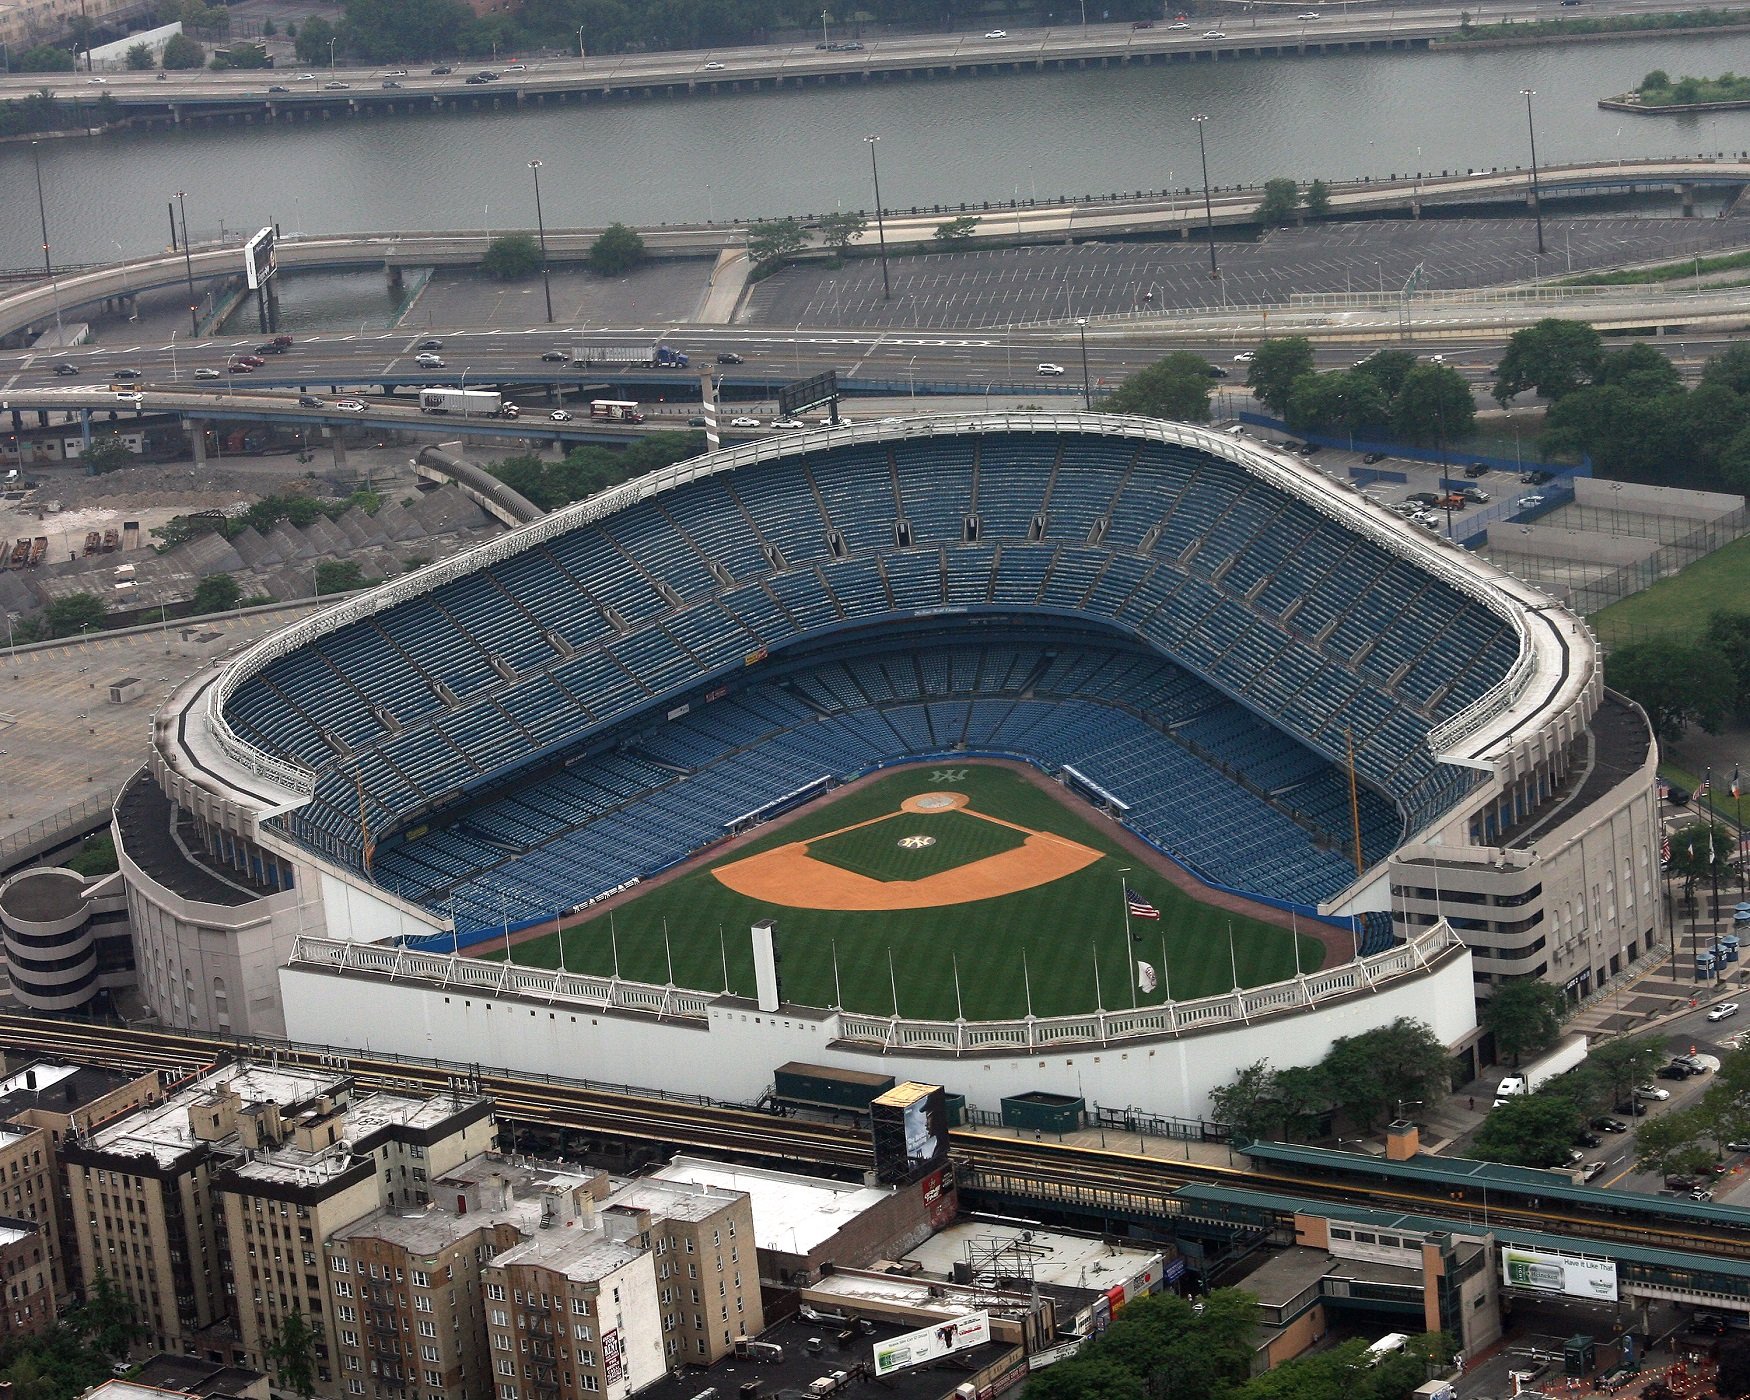 The old Yankee Stadium in the Bronx